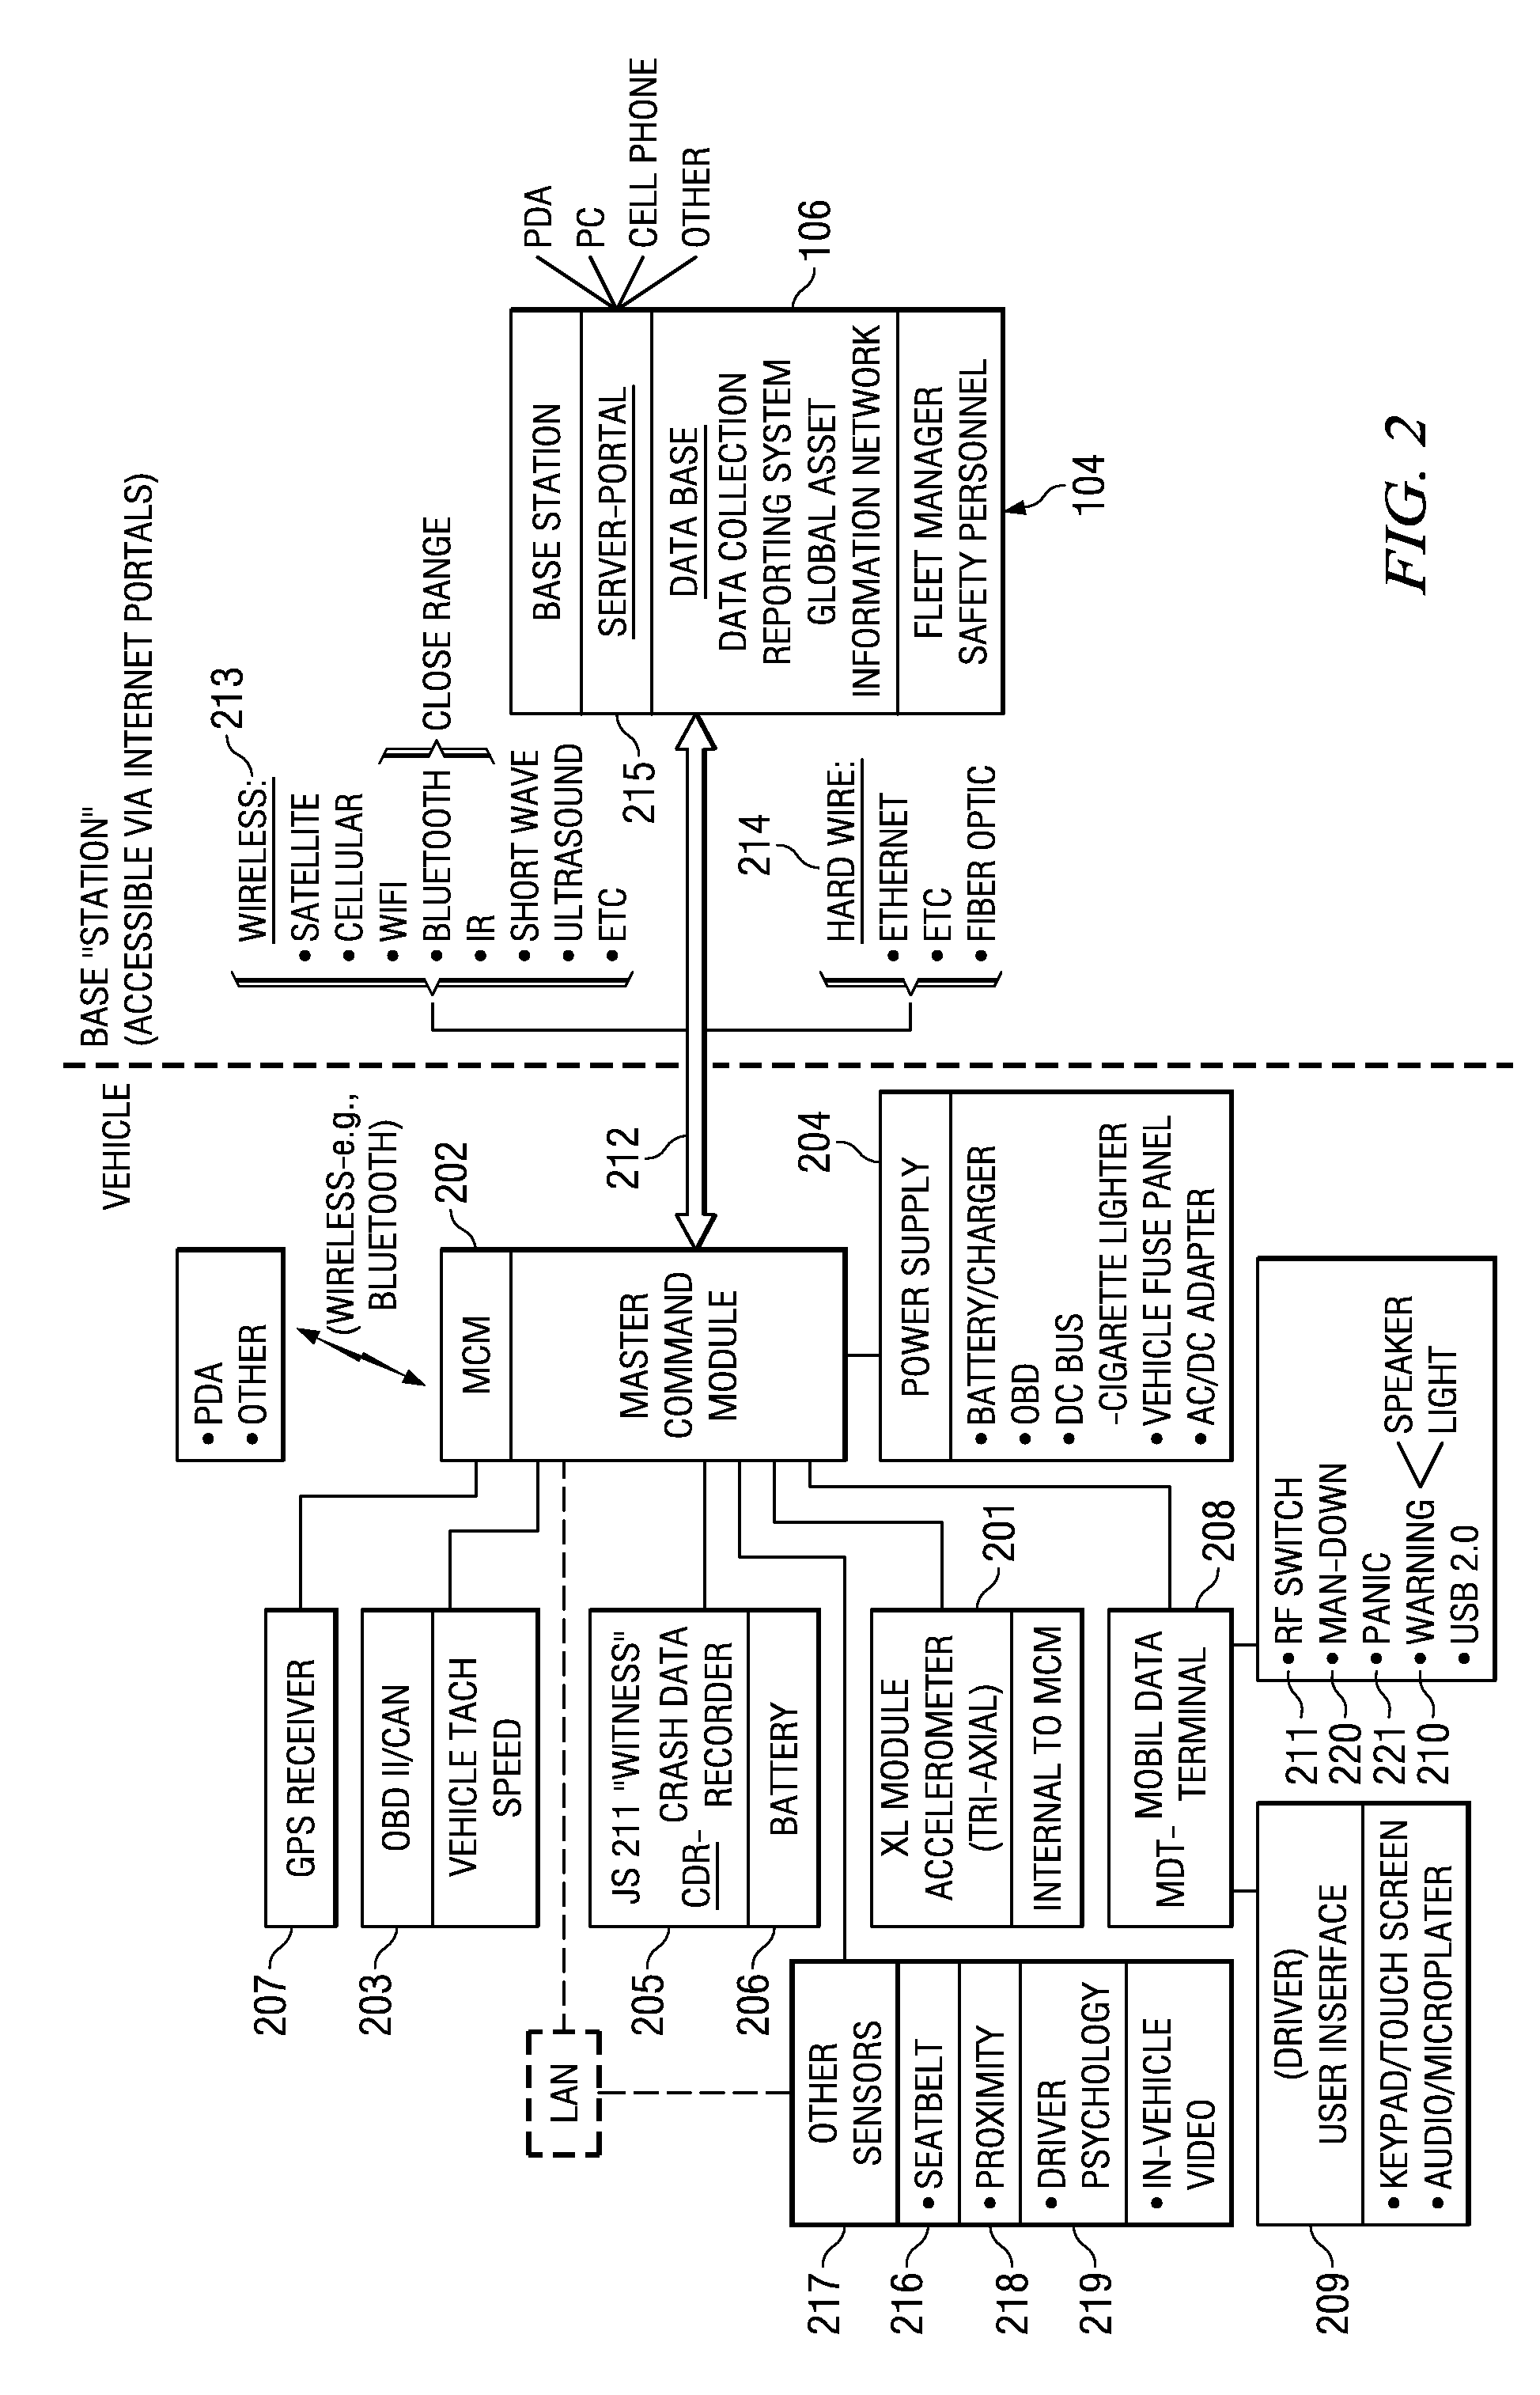 System and method for monitoring vehicle parameters and driver behavior